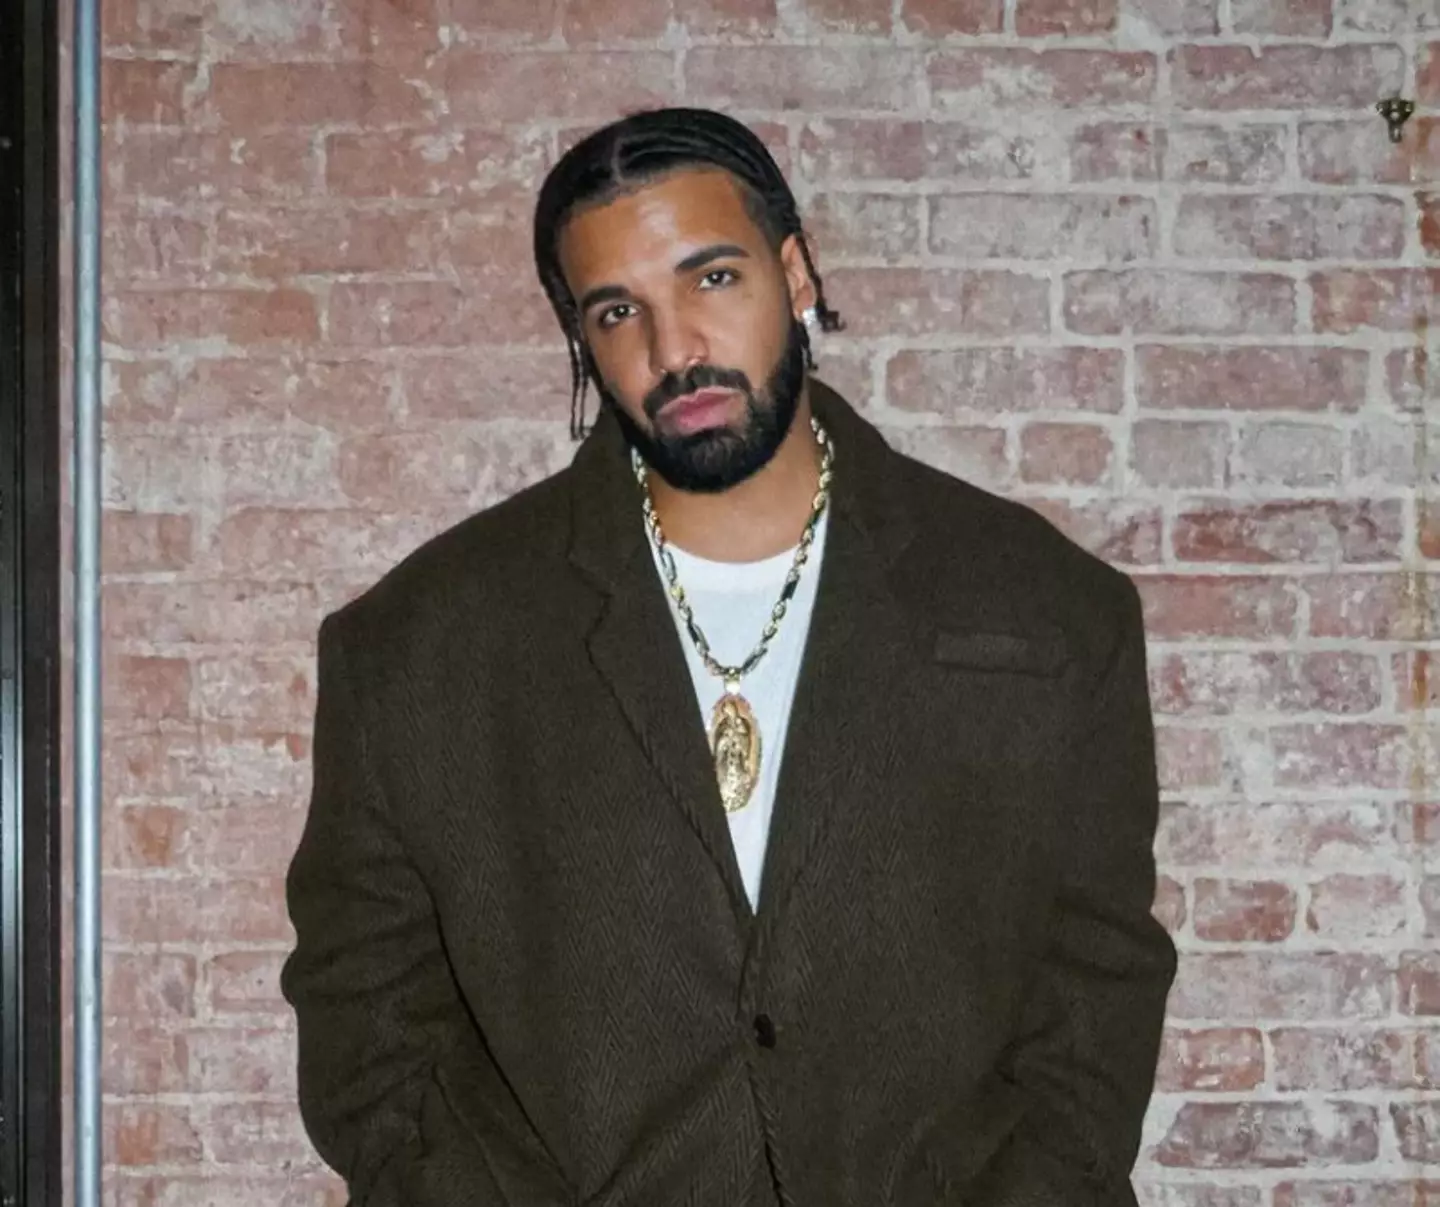 Drake is known for his lavish bets on sporting events.